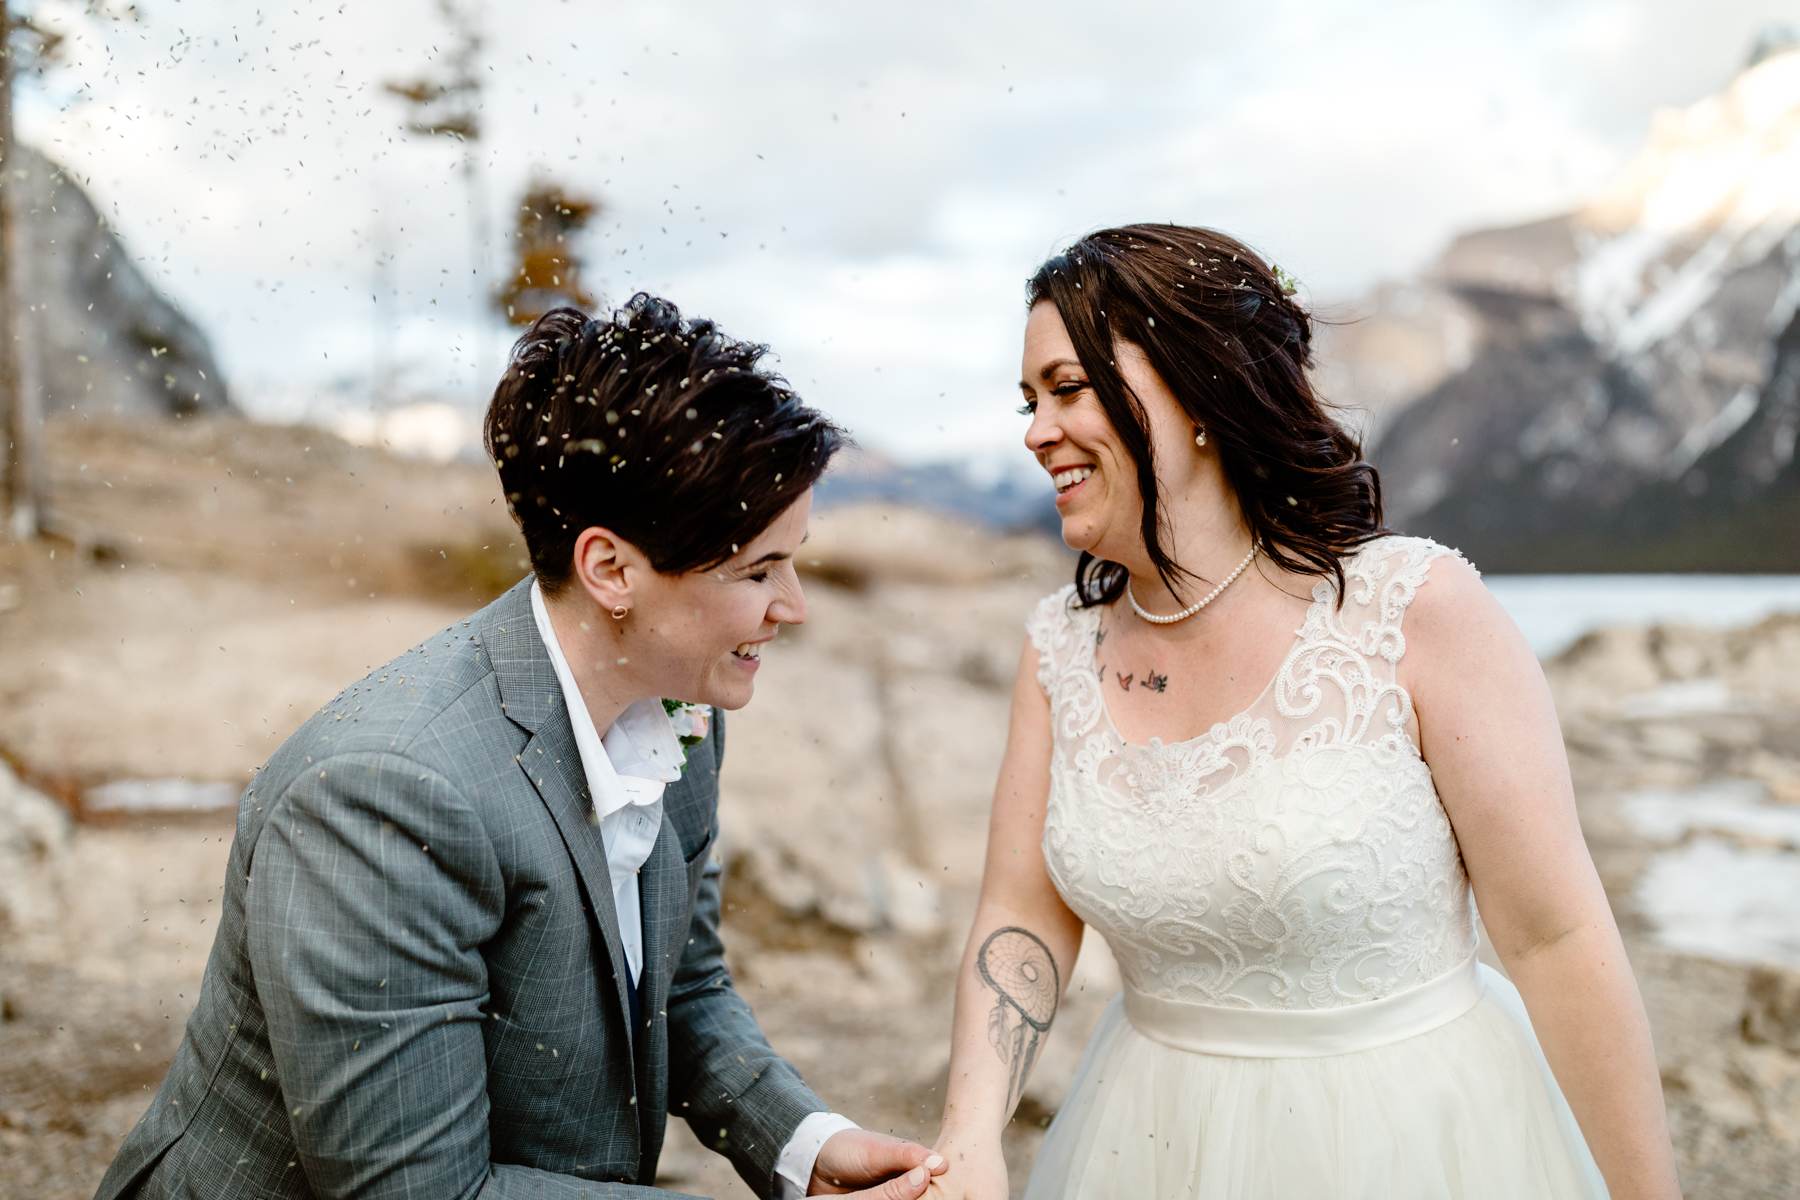 Banff National Park Elopement Photography with LGBTQ-friendly photographers - Image 26